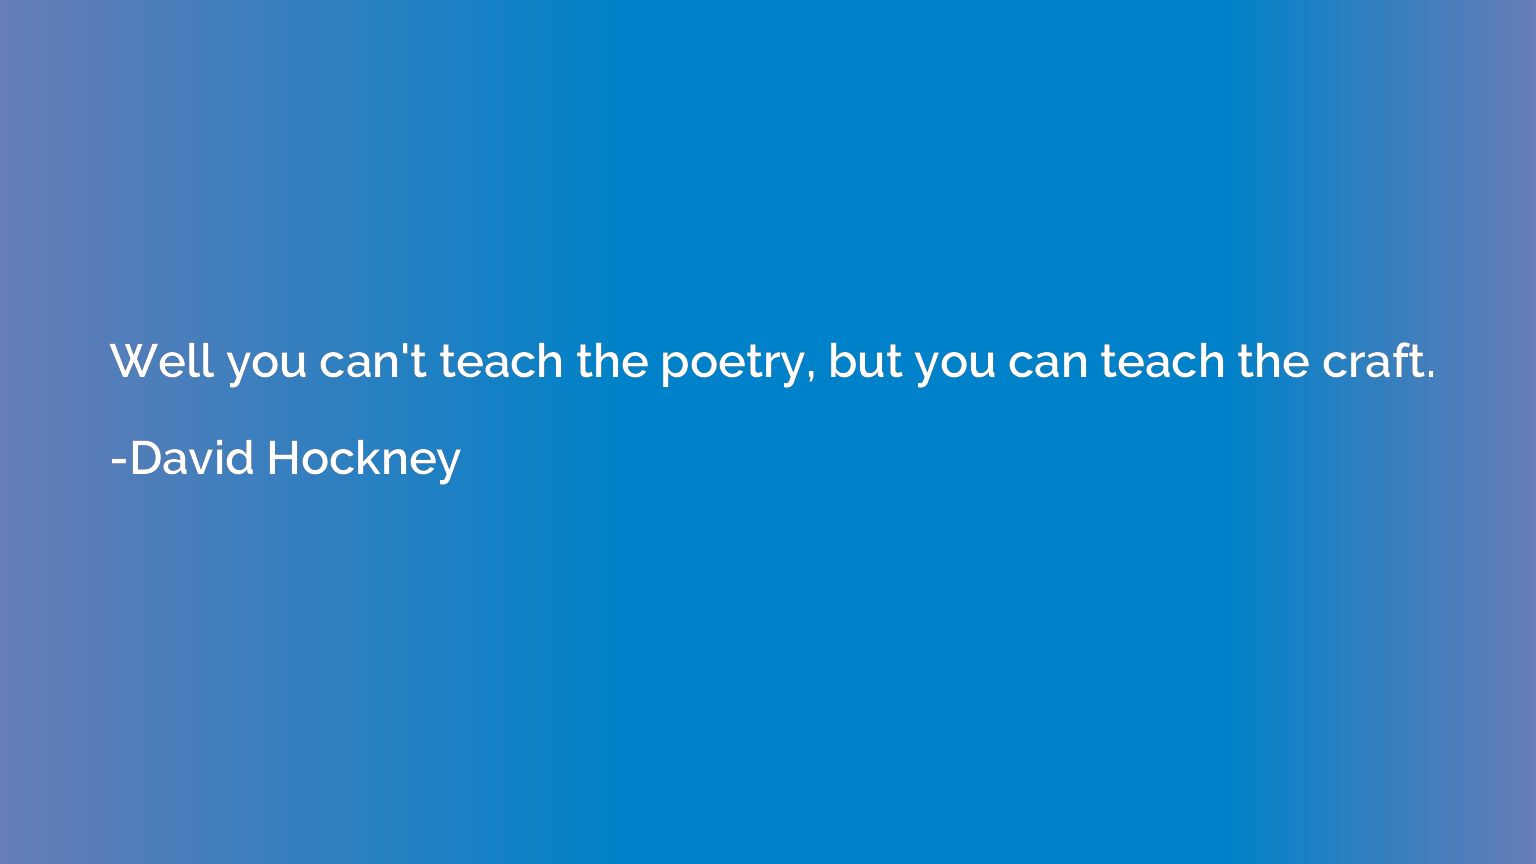 Well you can't teach the poetry, but you can teach the craft